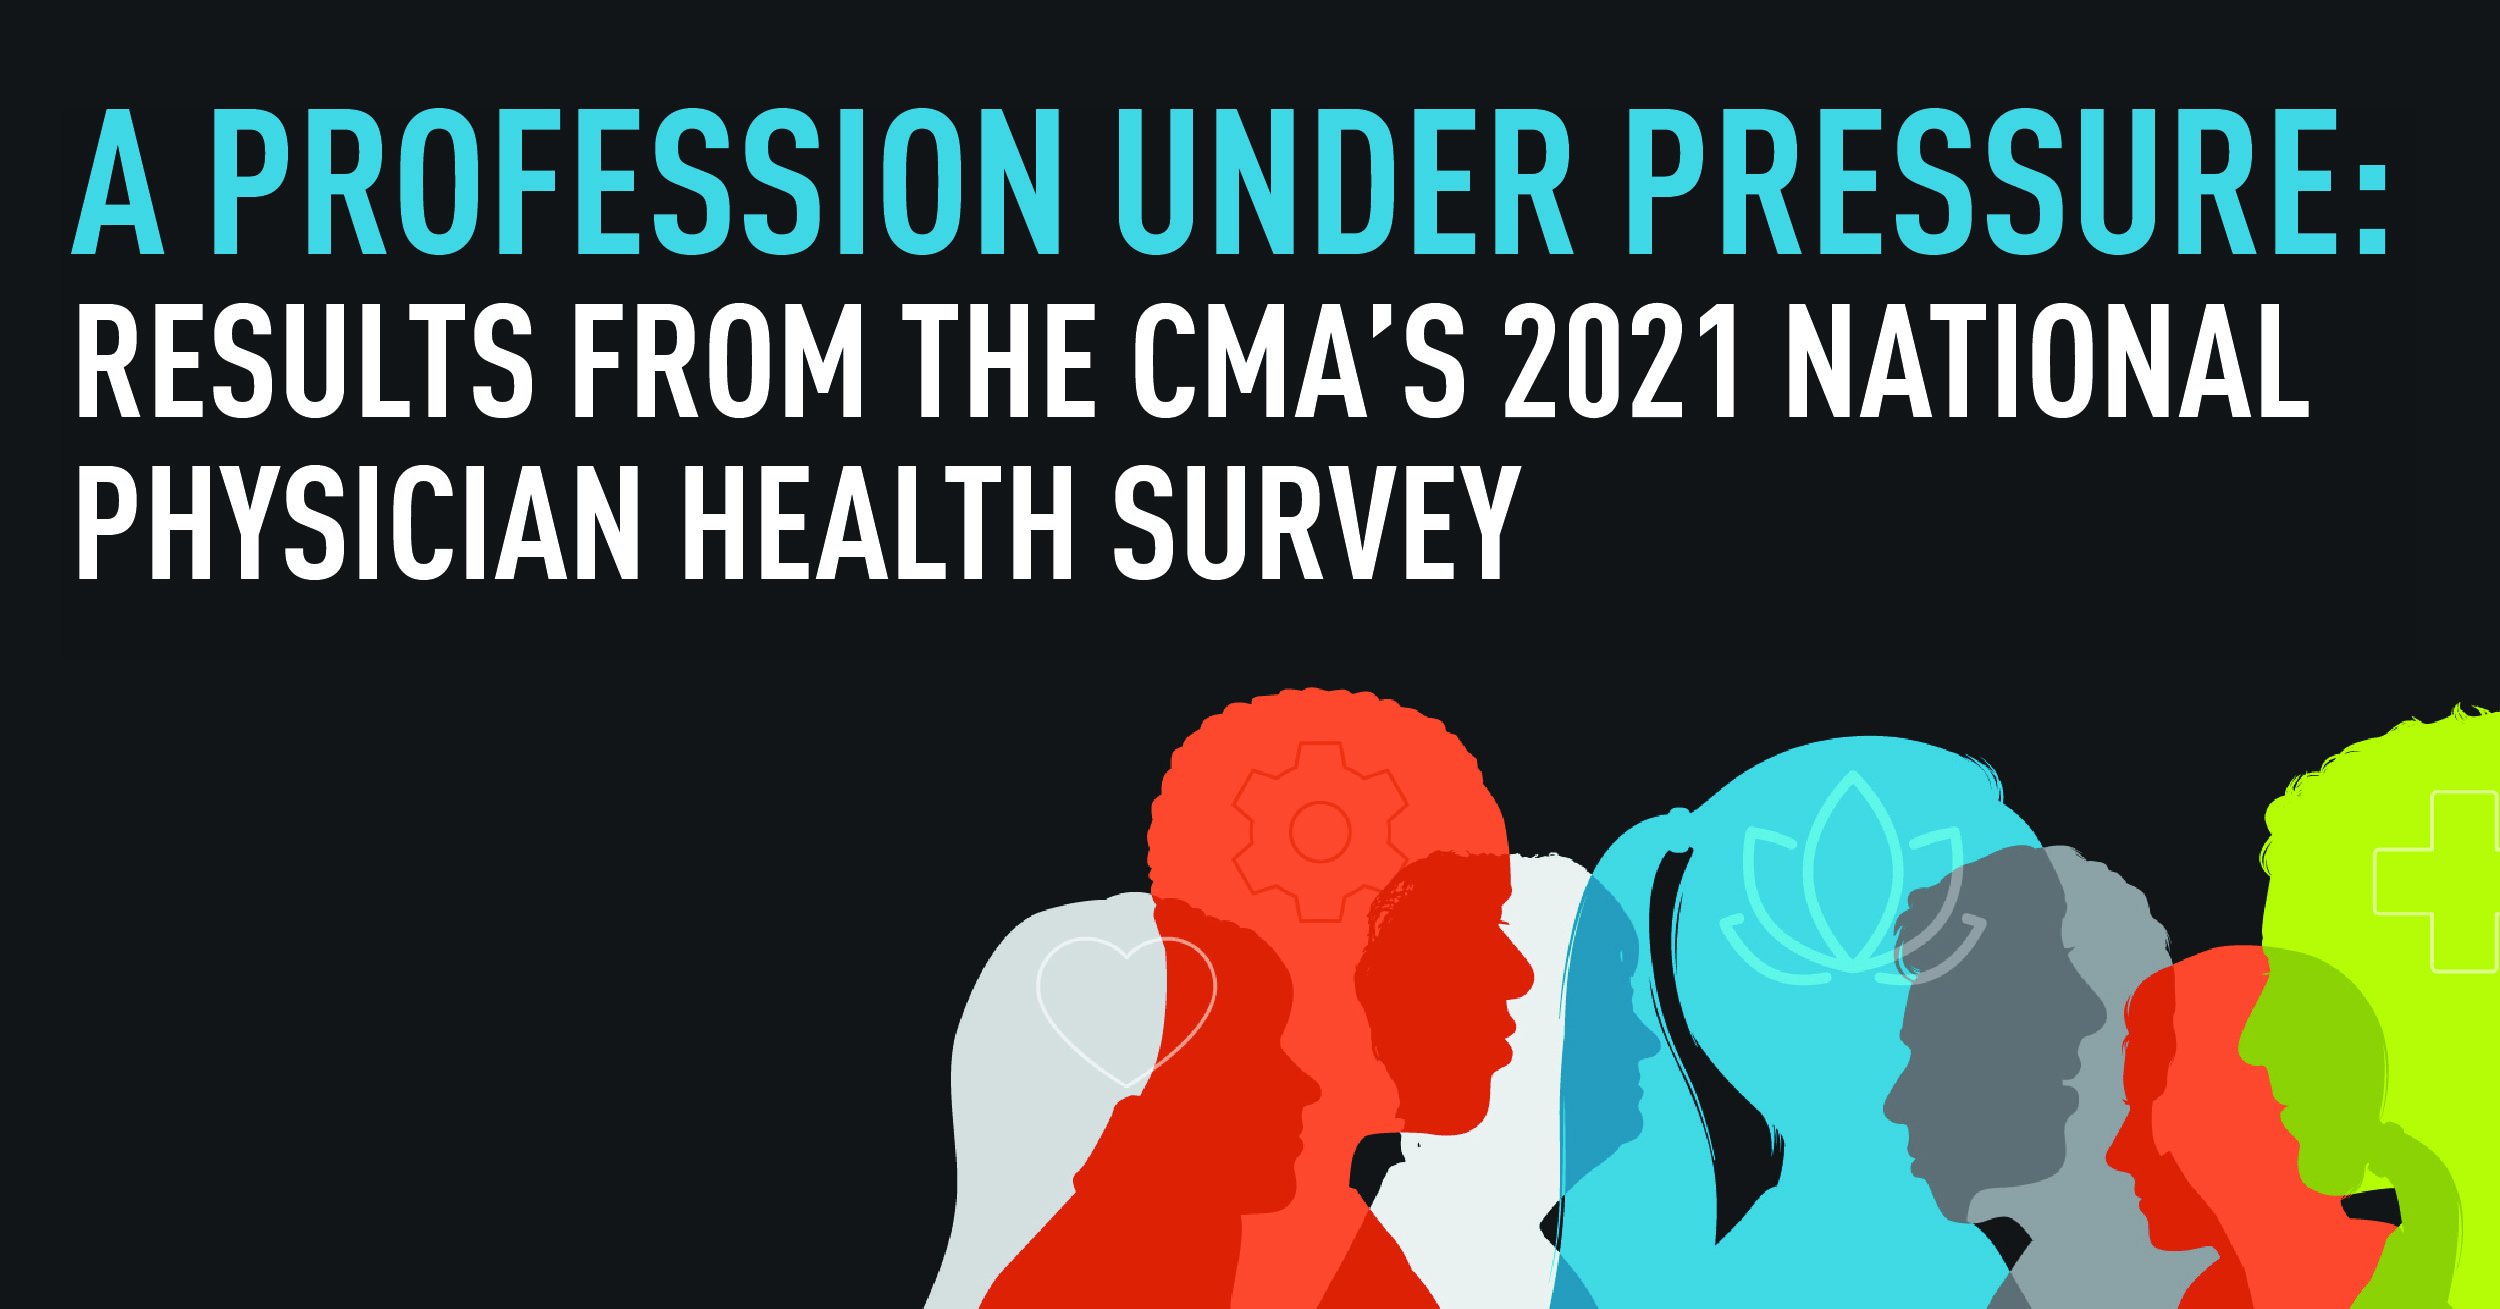 A profession under pressure results from the CMA’s 2021 National